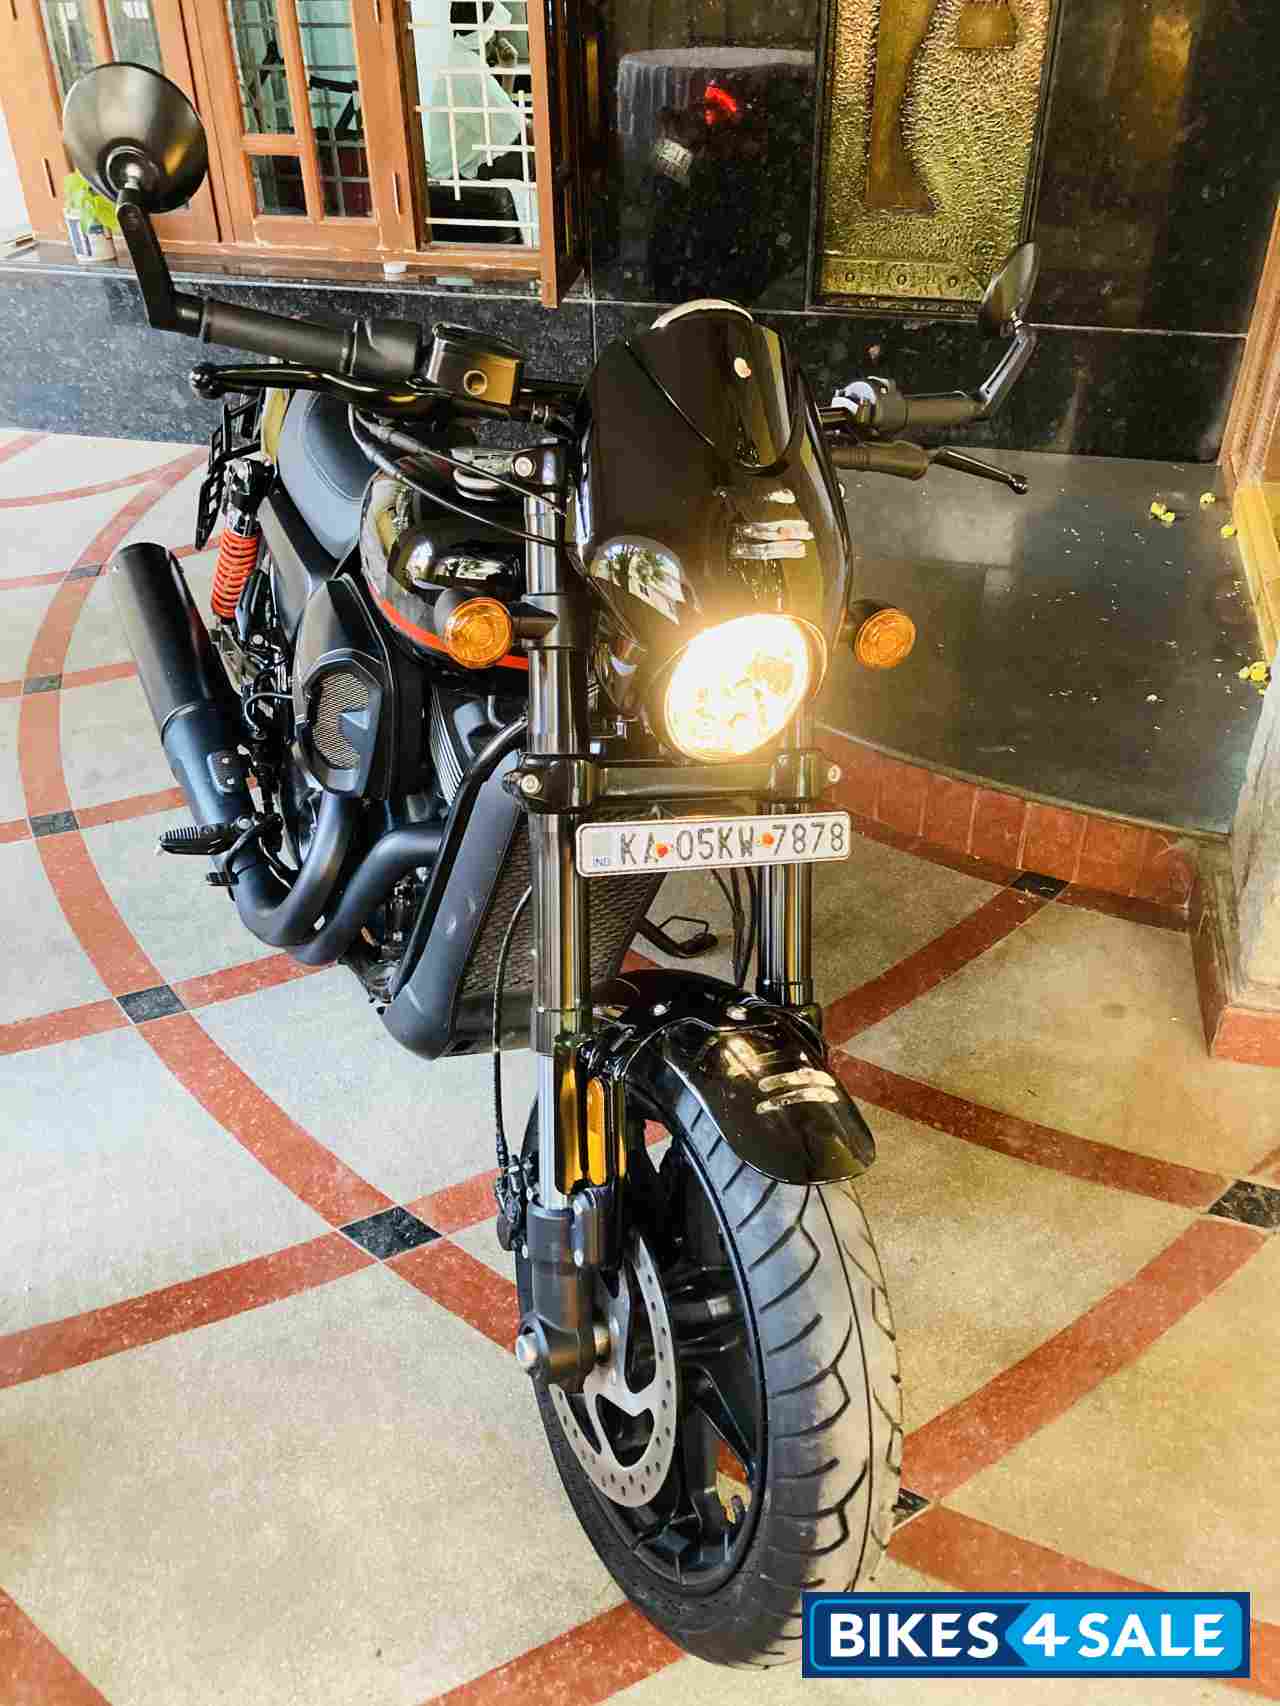 Used 2019 Model Harley Davidson Street Rod For Sale In Bangalore Id 334233 Black Colour Bikes4sale